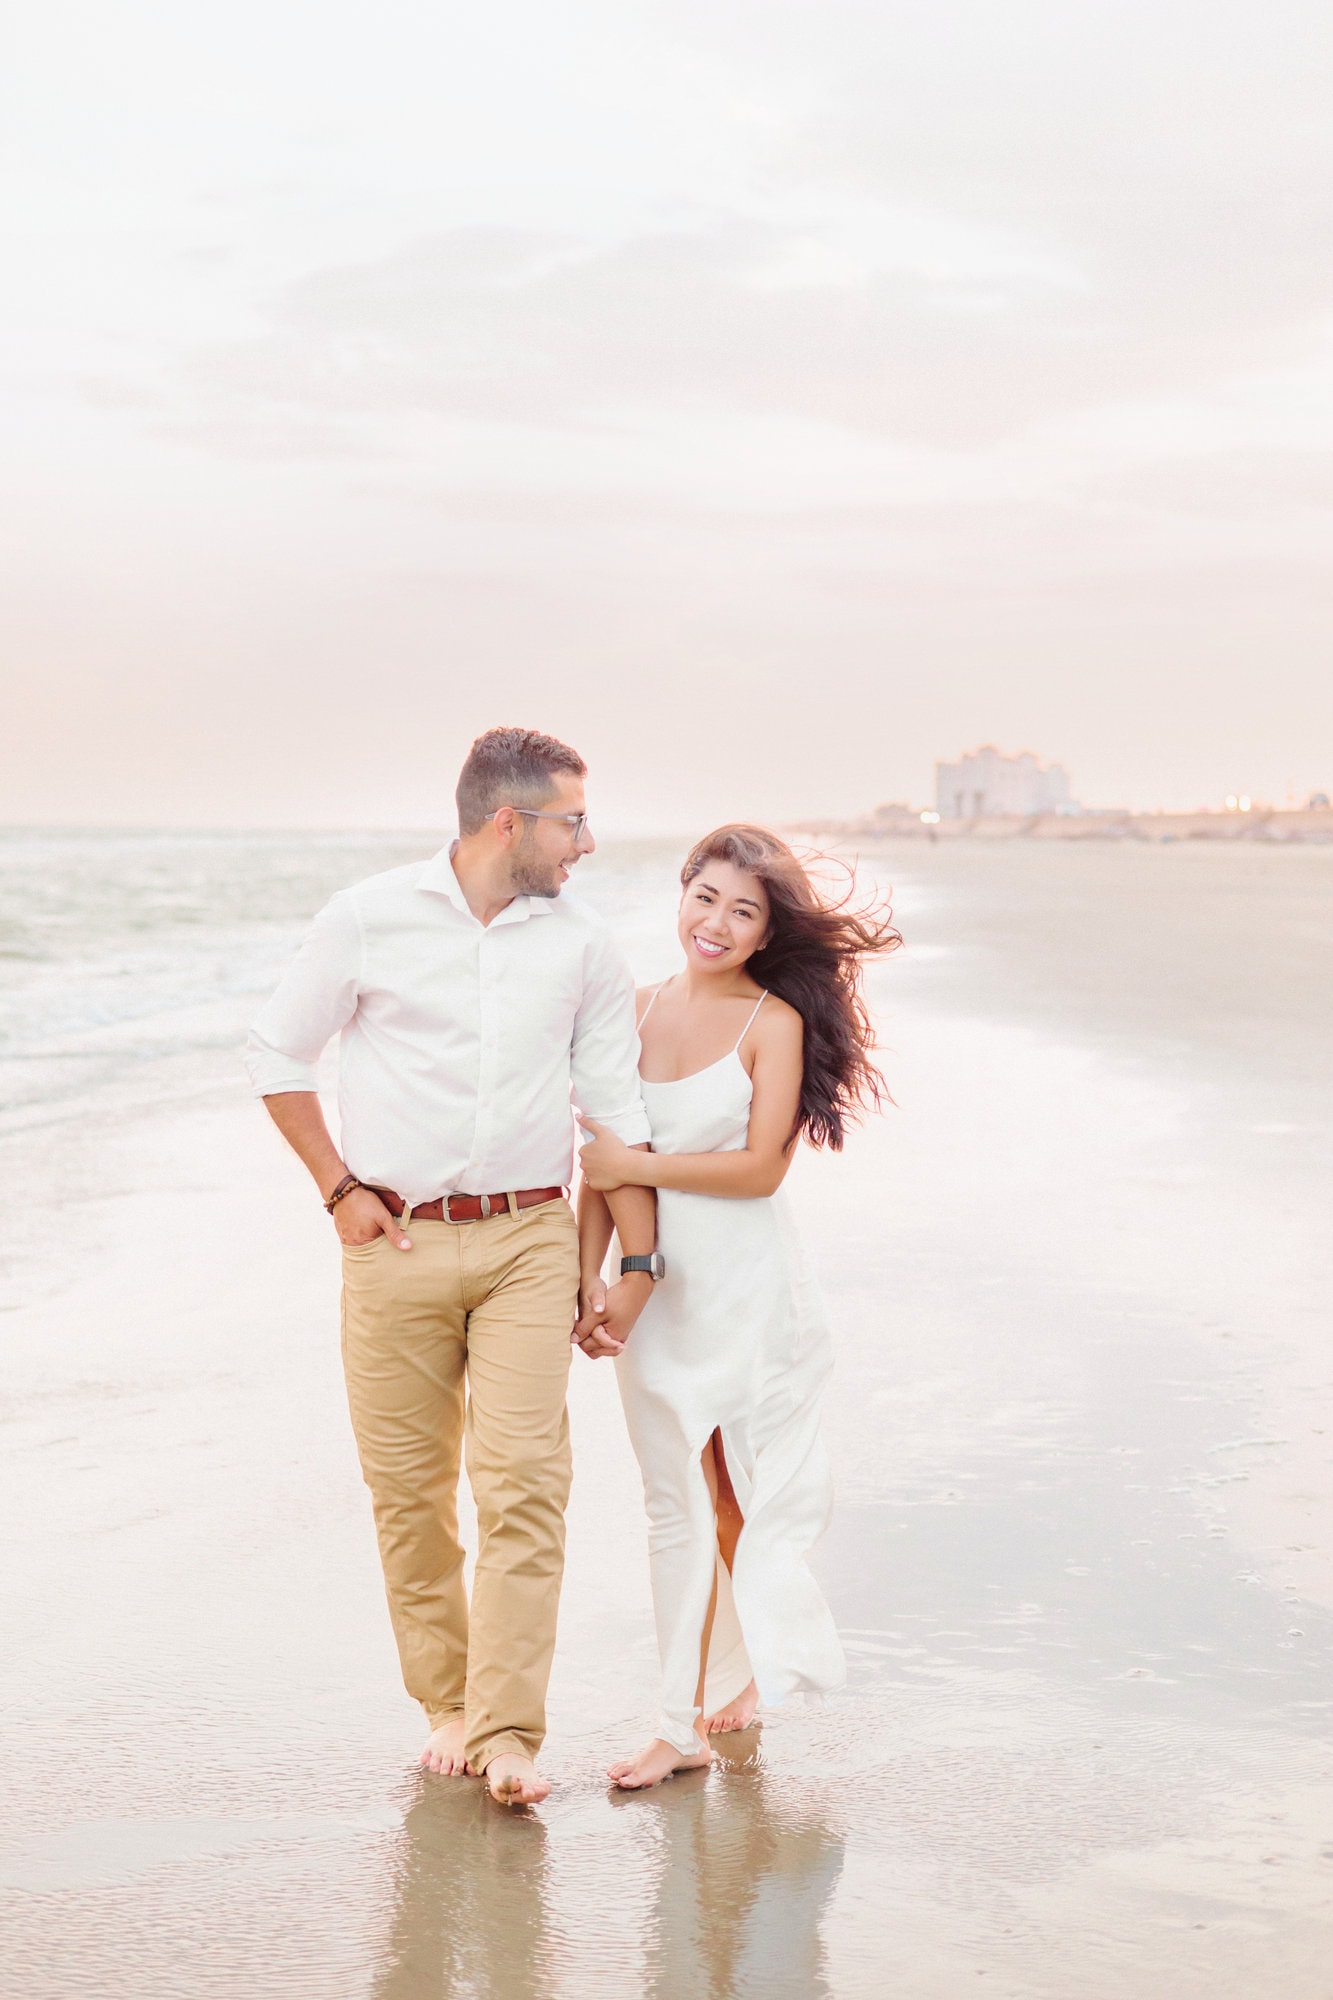 Elegant engagement pictures on the beach with the engaged couple walking hand in hand by the water.